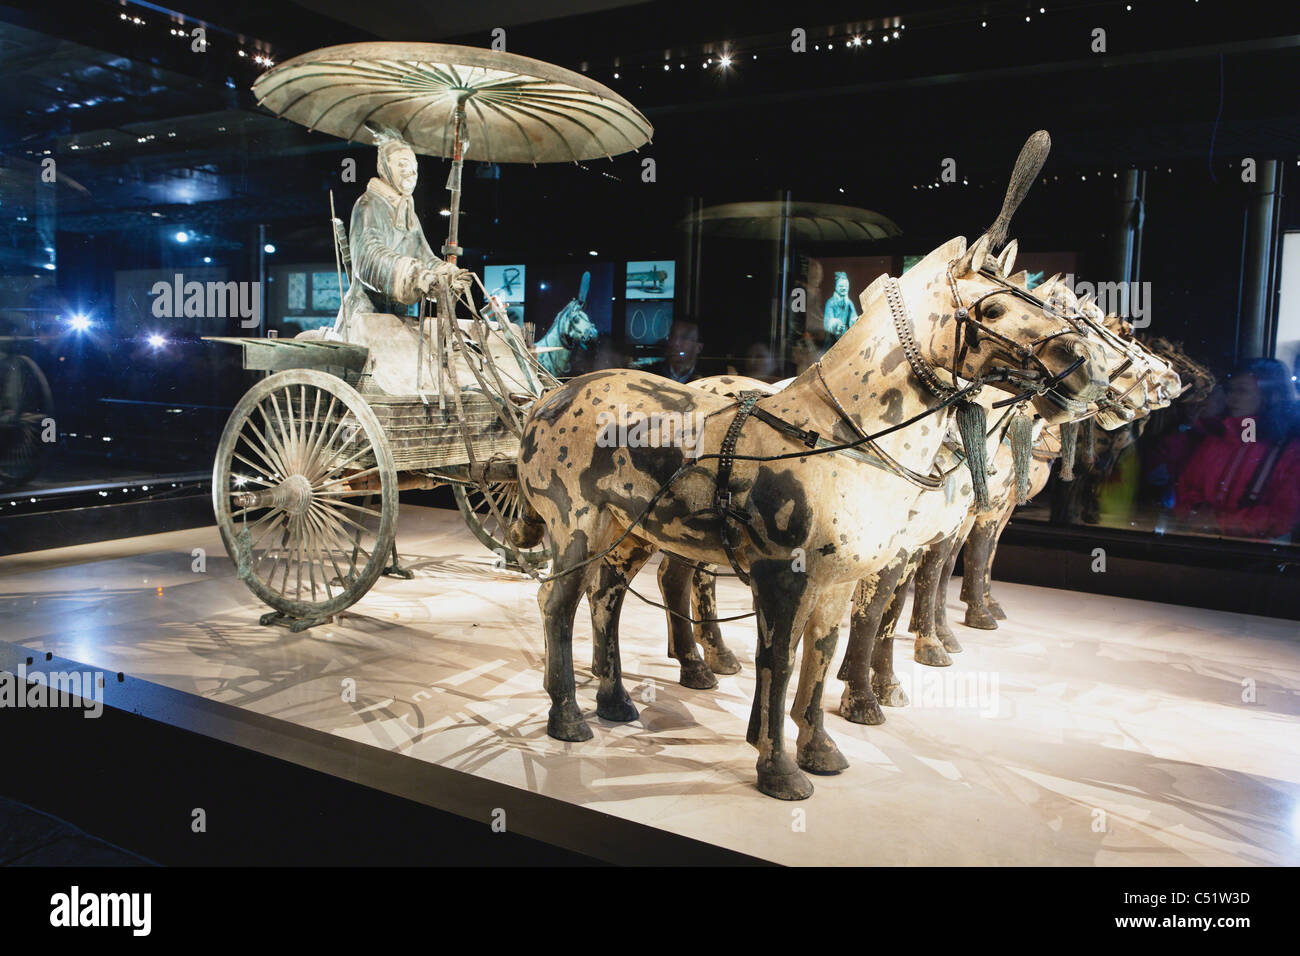 Bronze Chariot with Horses Number One on Display in the Museum of Qin Terracotta Warriors and Horses, Shaanxi, China Stock Photo